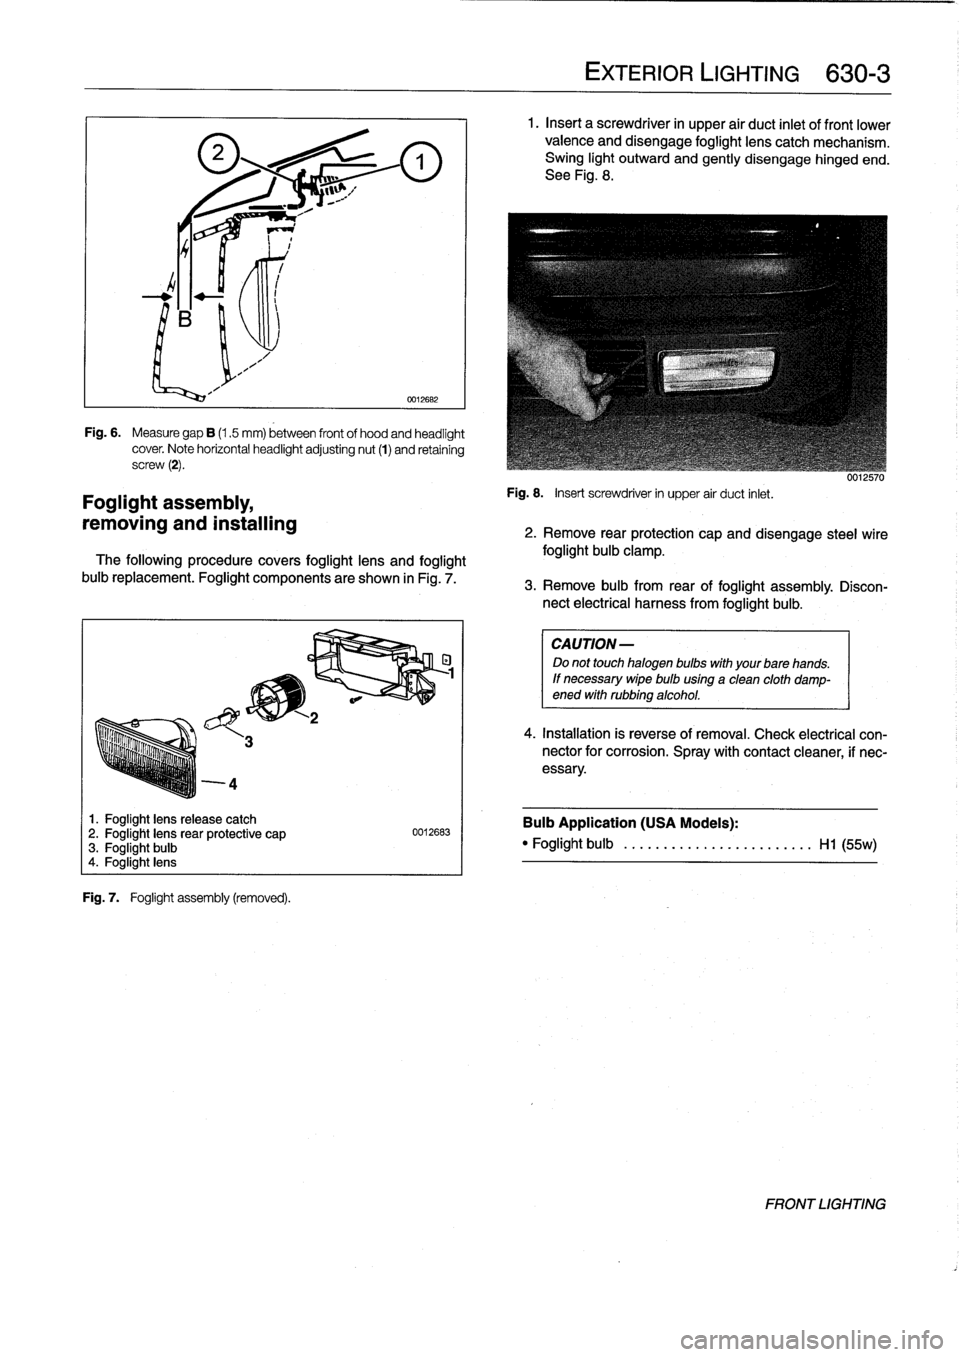 BMW 318i 1998 E36 Workshop Manual 4

Foglight
assembly,

removing
and
installing

1
.
Foglight
lens
release
catch
2
.
Foglight
lensrear
protective
cap
3
.
Foglight
bulb
4
.
Foglight
lens

Fig
.
7
.

	

Foglight
assembly
(removed)
.

0